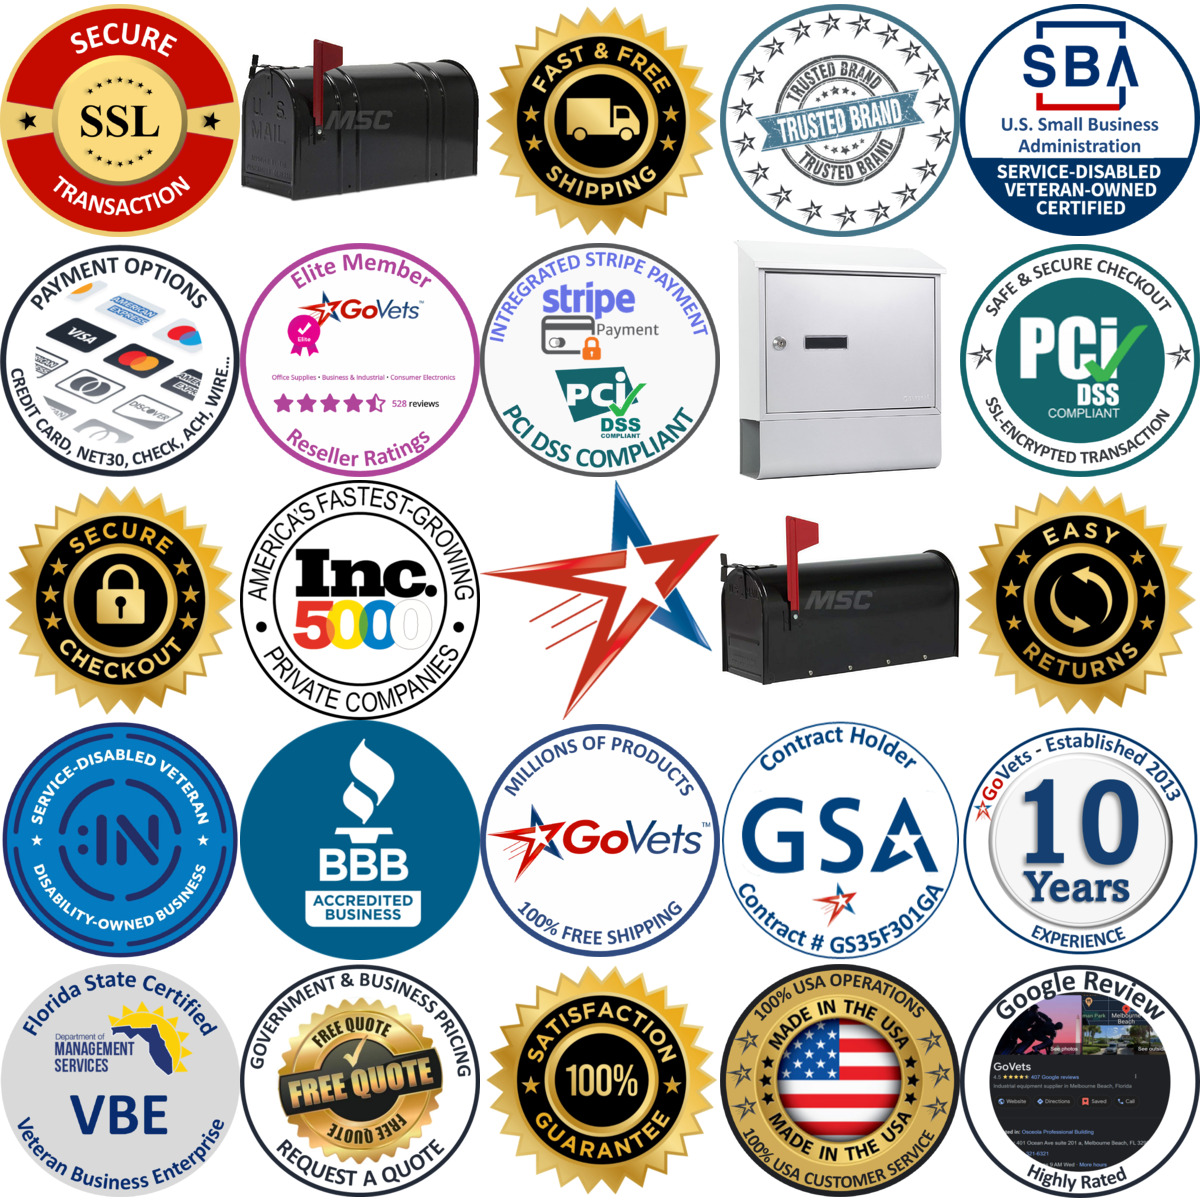 A selection of Mailboxes and Accessories products on GoVets